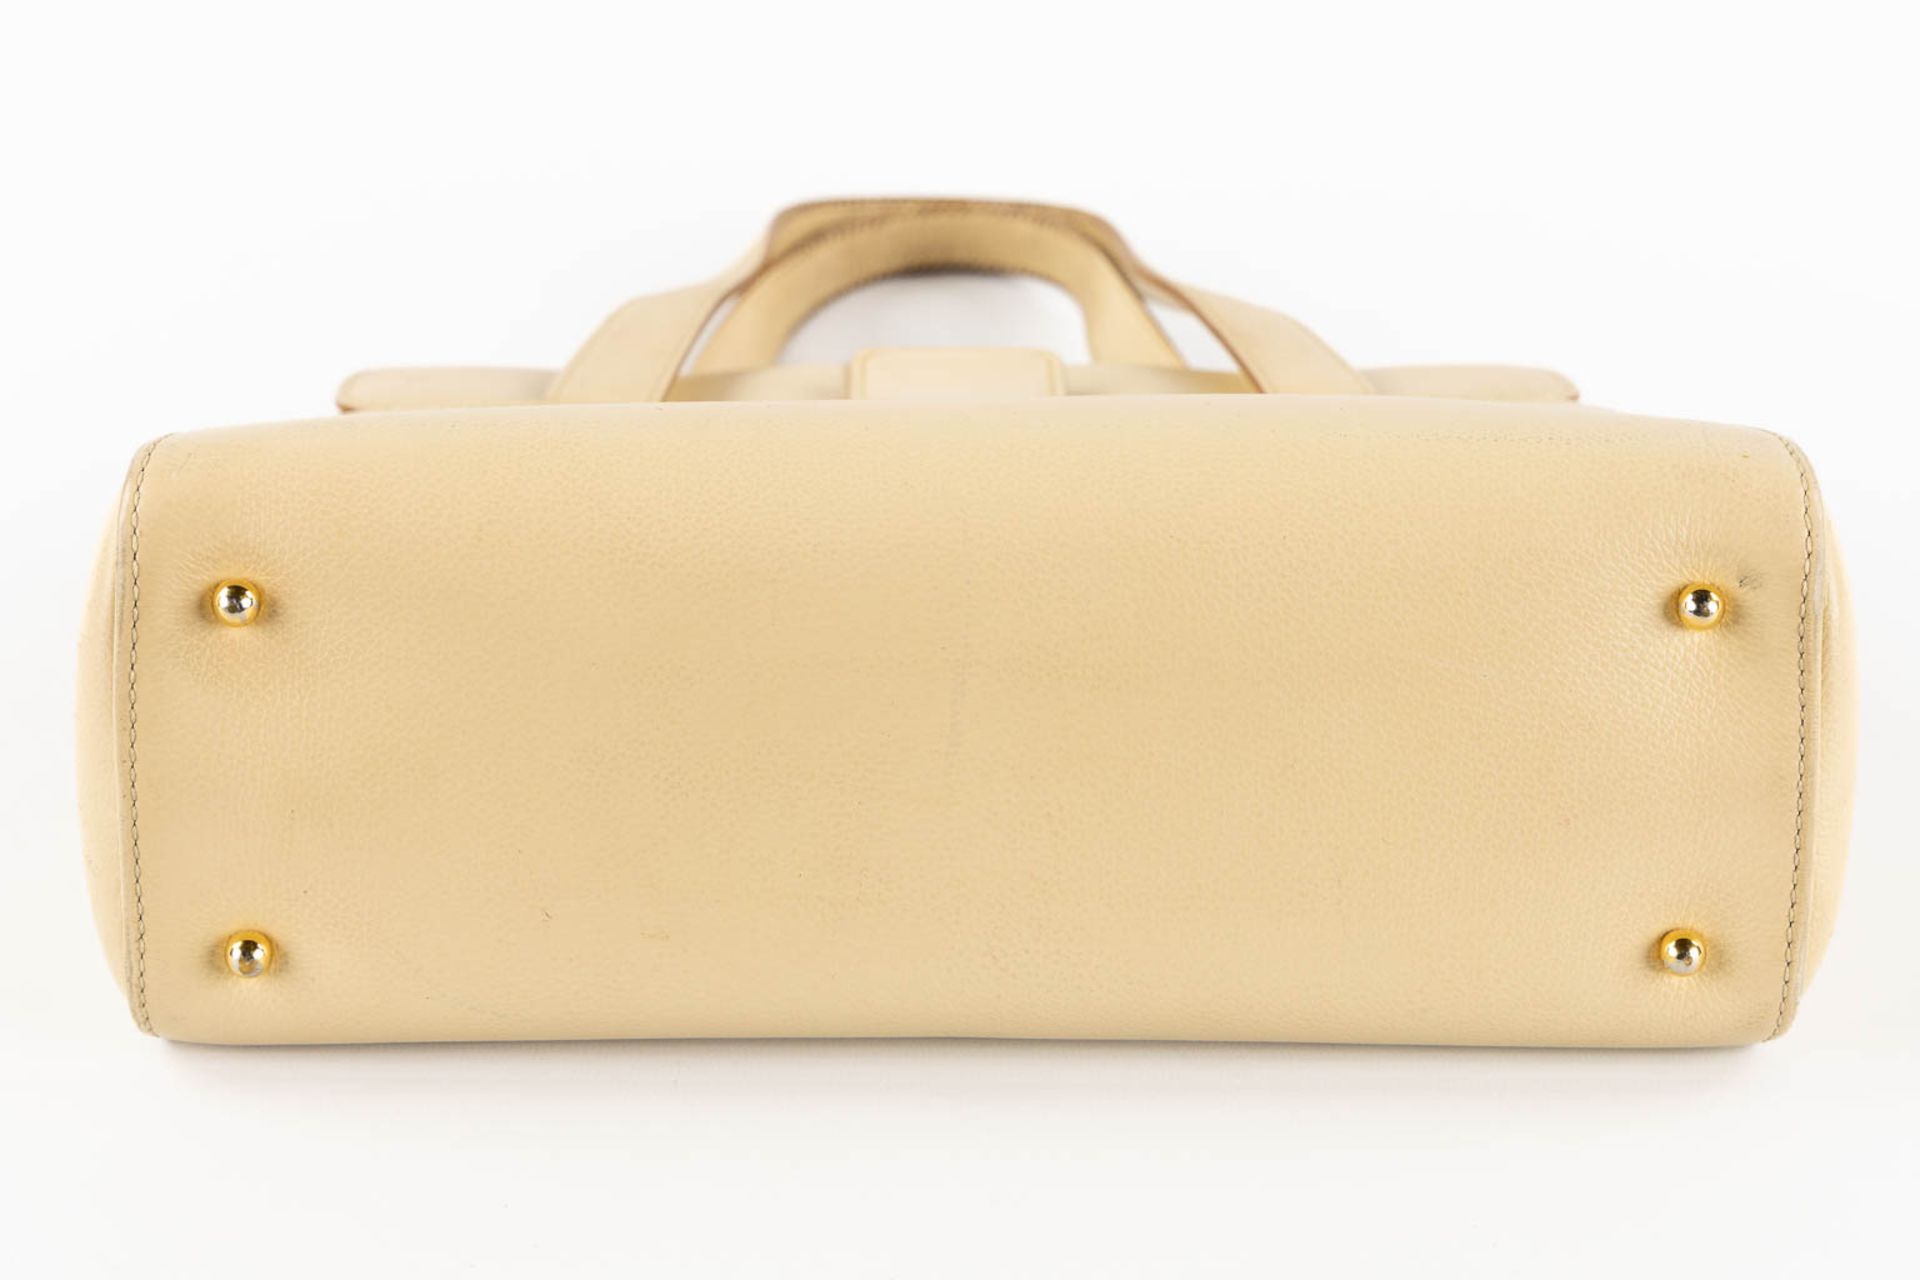 Delvaux model 'Reverie' Jumping, Ivoire. Ivory coloured leather. (L:11 x W:28 x H:23 cm) - Image 8 of 20